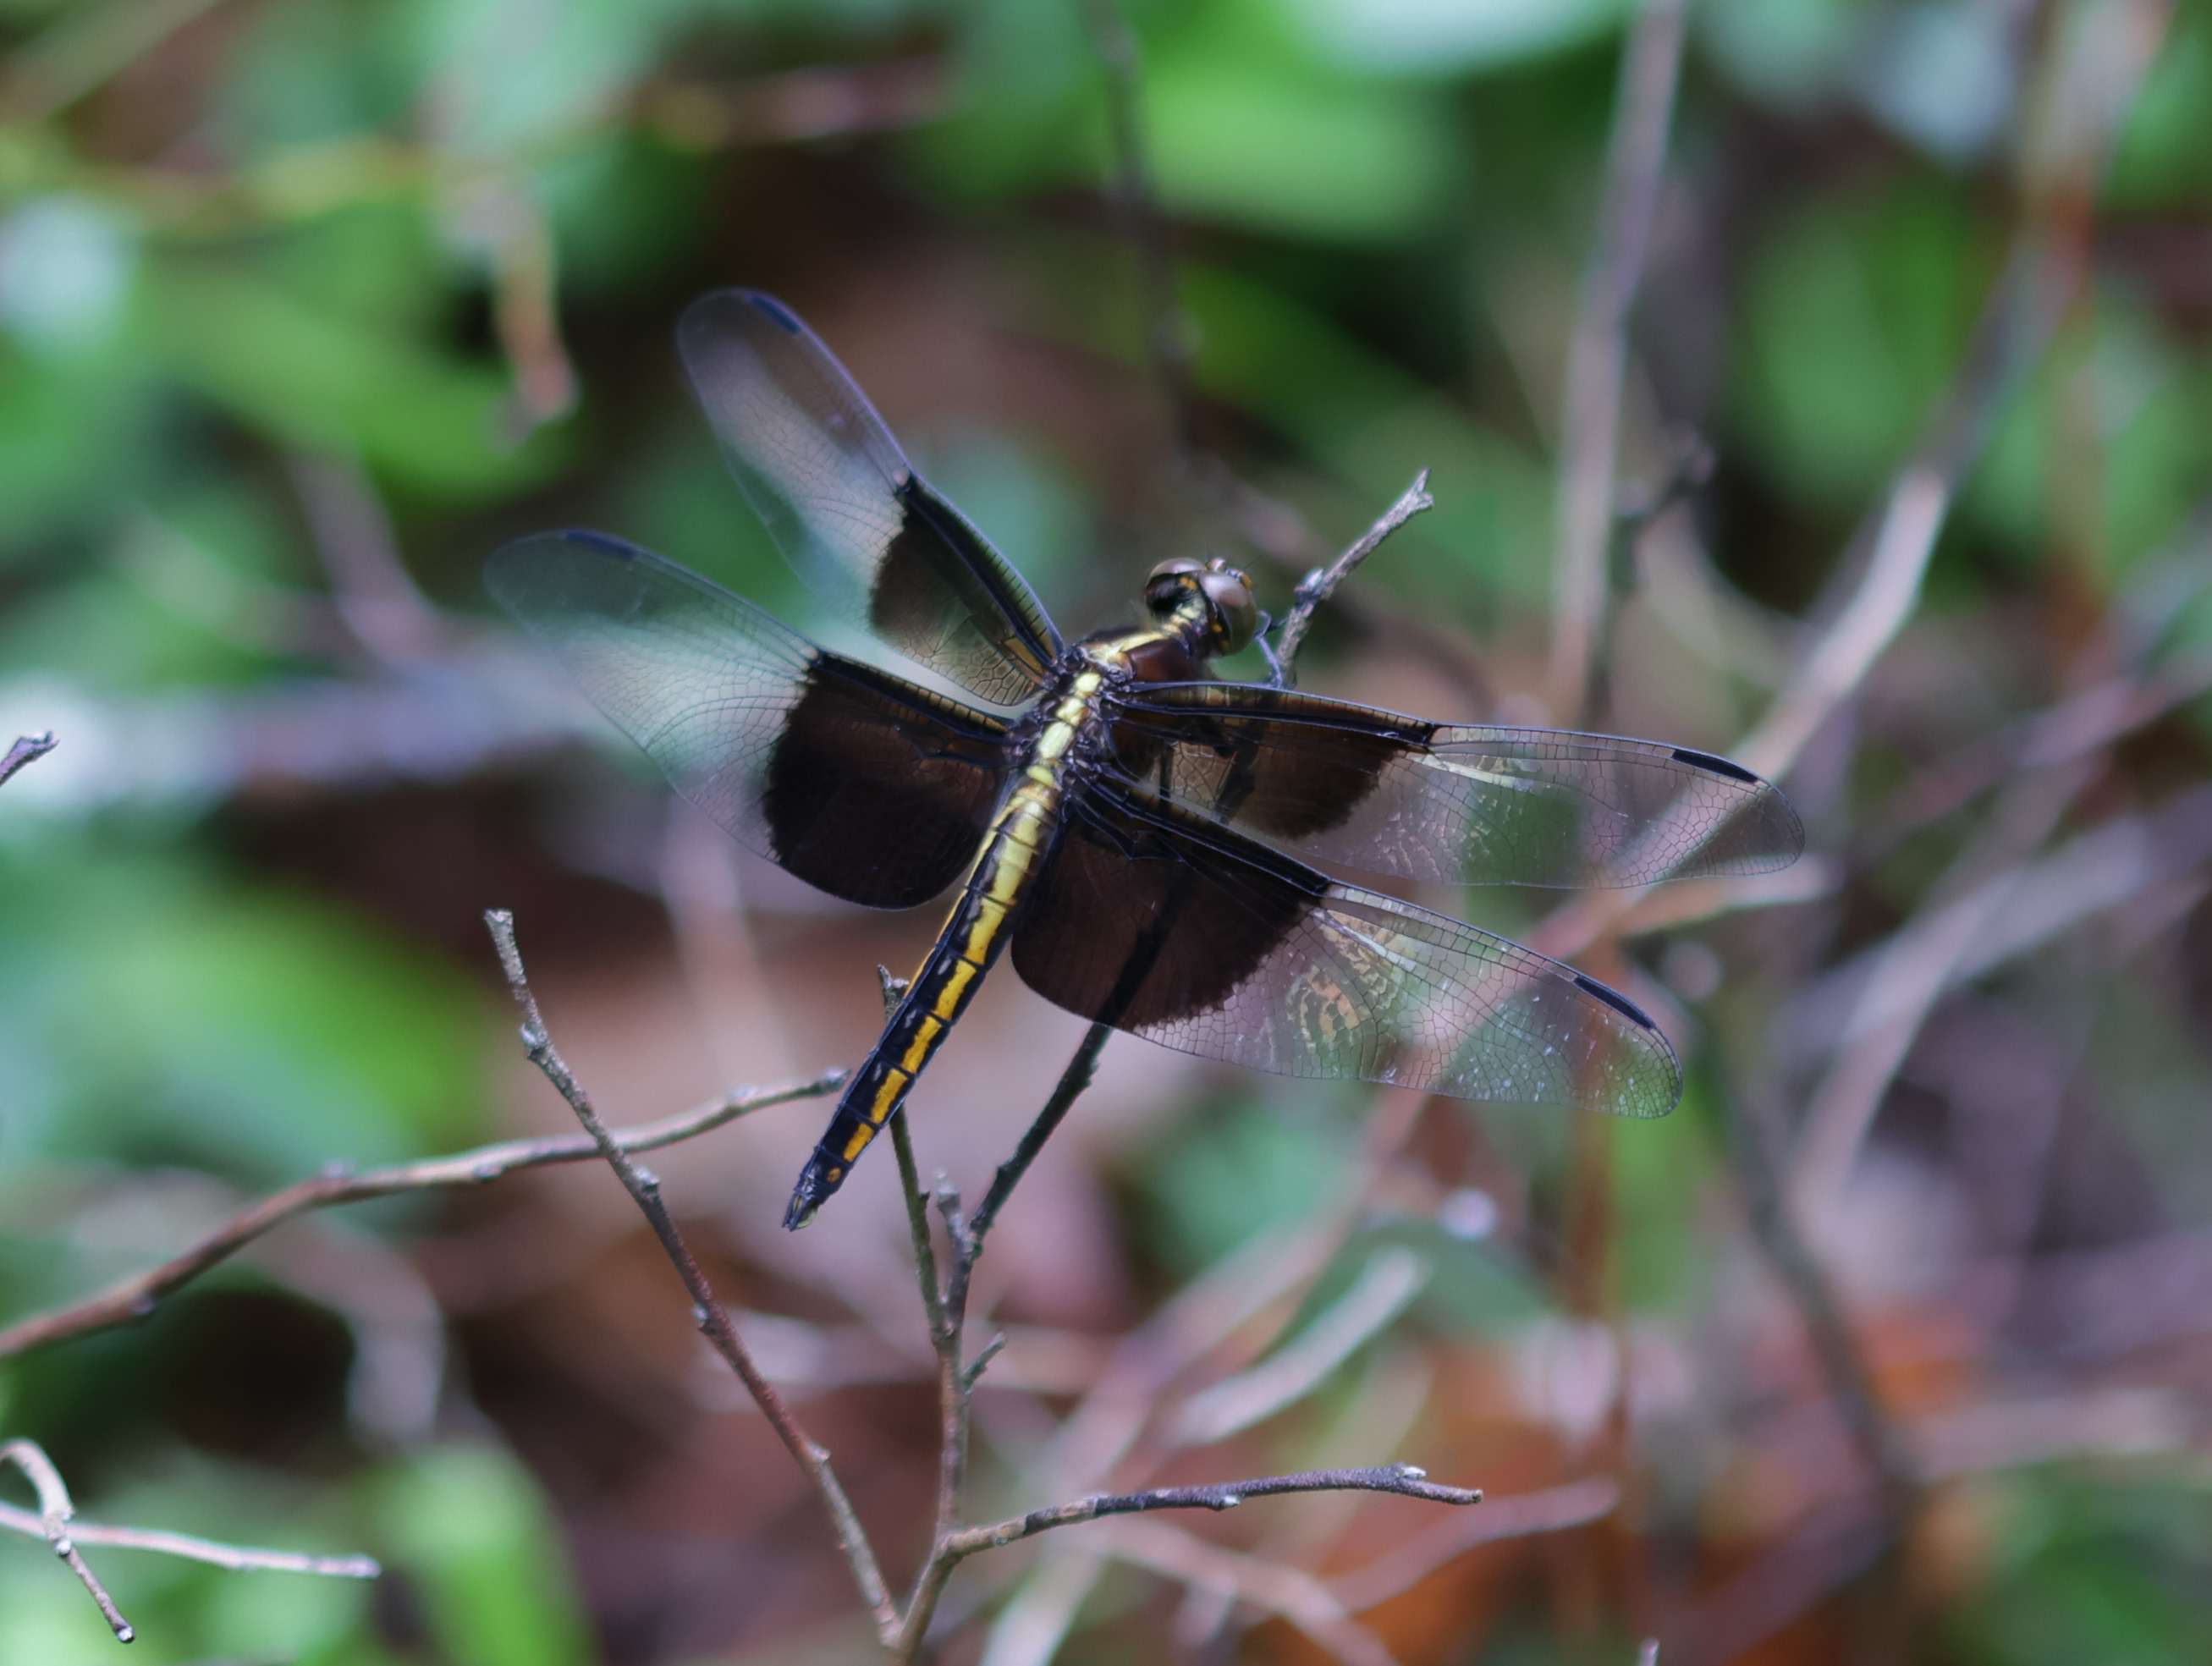 black-and-yellow dragonfly perched on branch